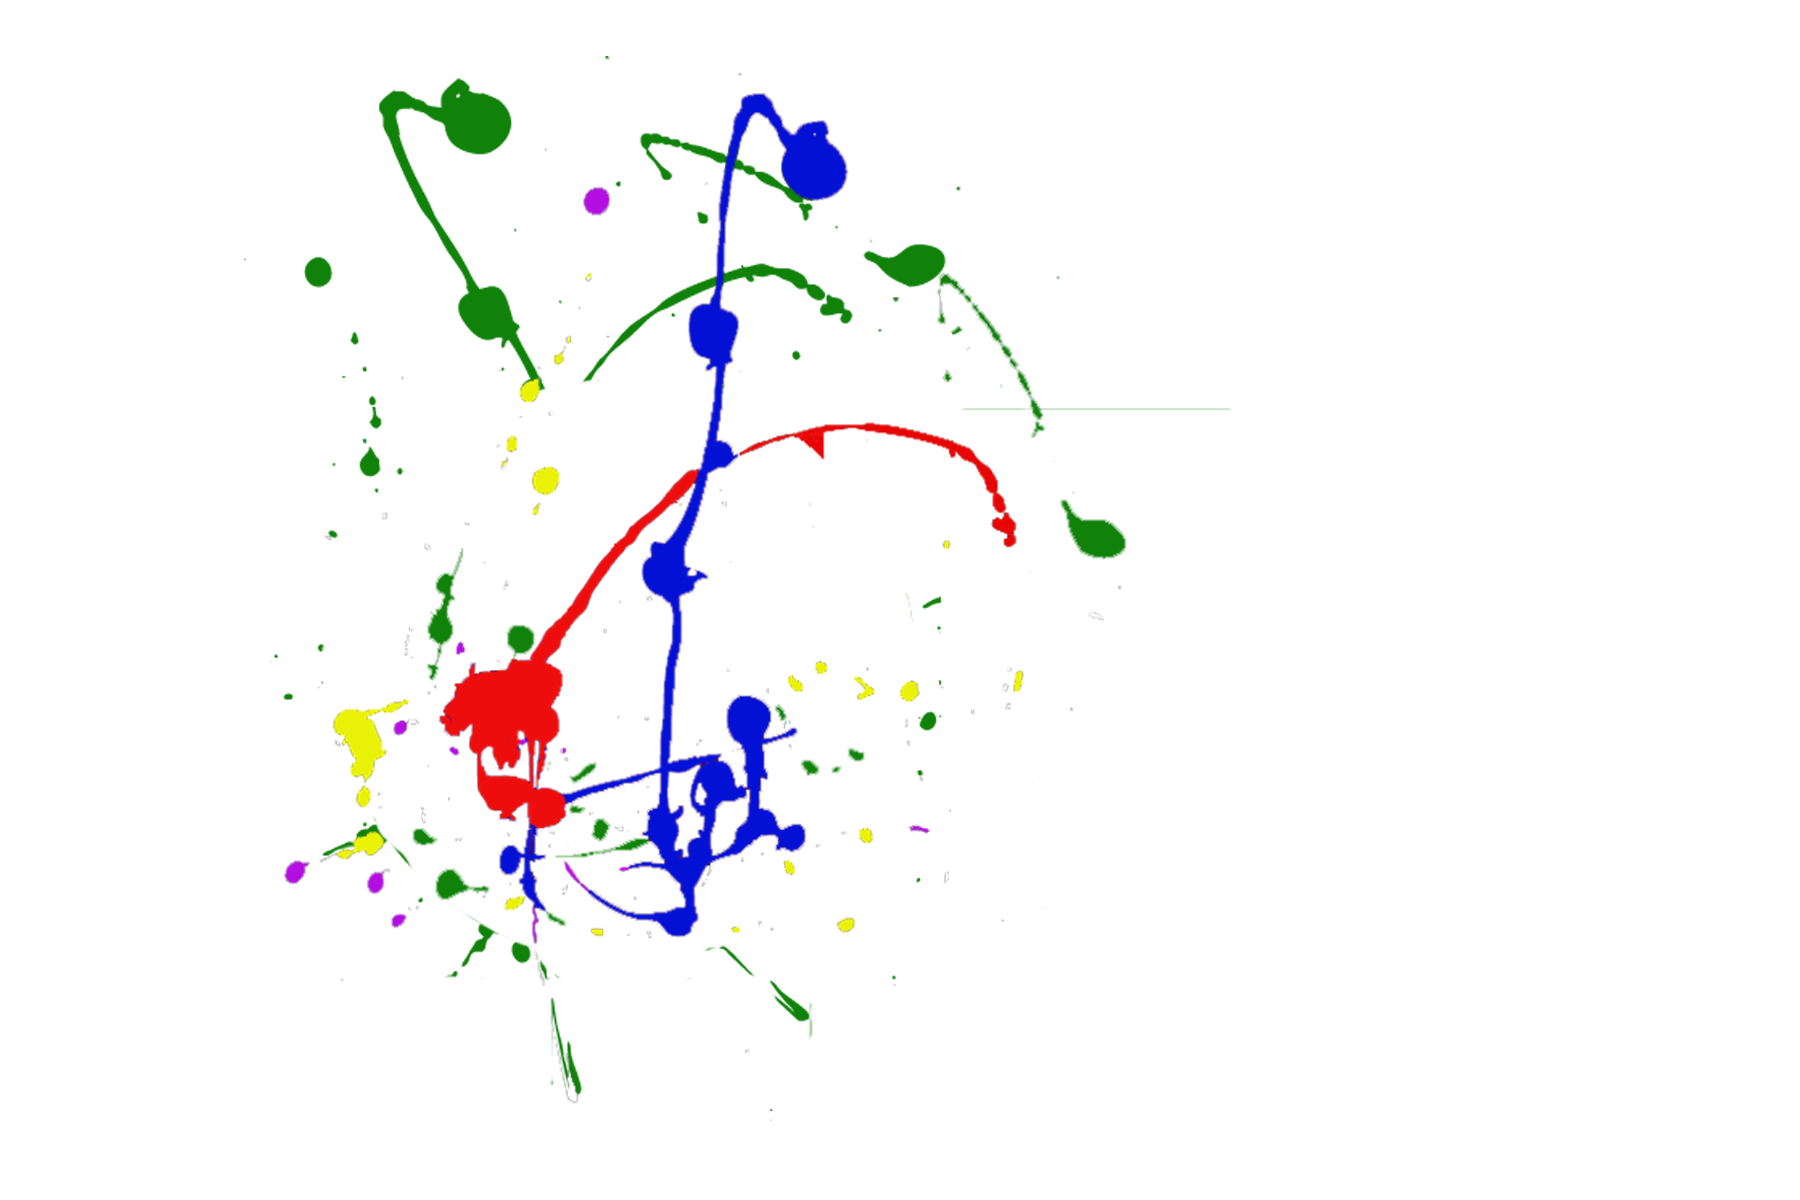 Outside The Lines Productions